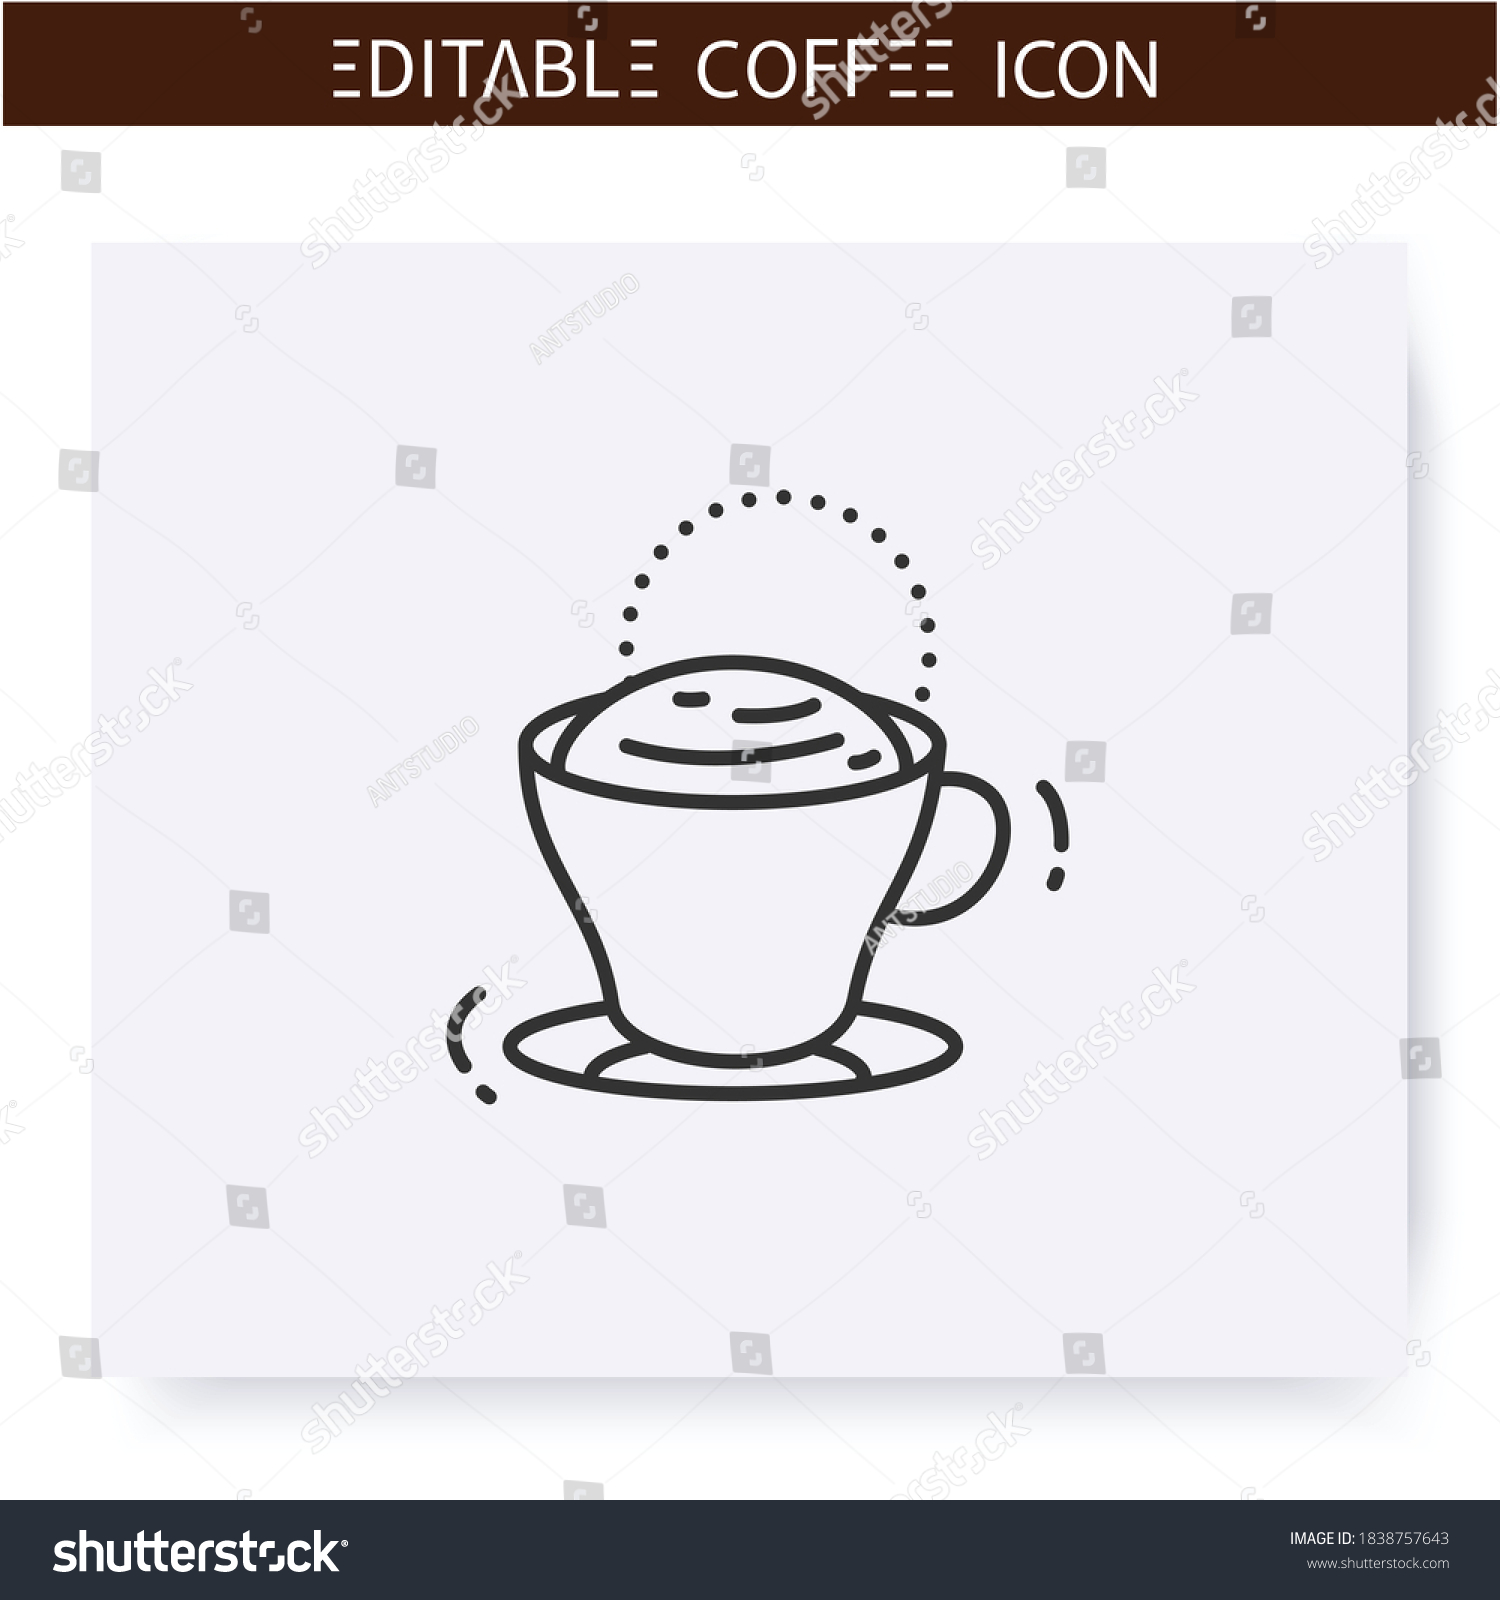 SVG of Shiumatto coffee line icon.Type of coffee drink.Espresso with a bit of milk foam on top of it.Coffeehouse menu. Different caffeine drinks receipts concept. Isolated vector illustration.Editable stroke svg